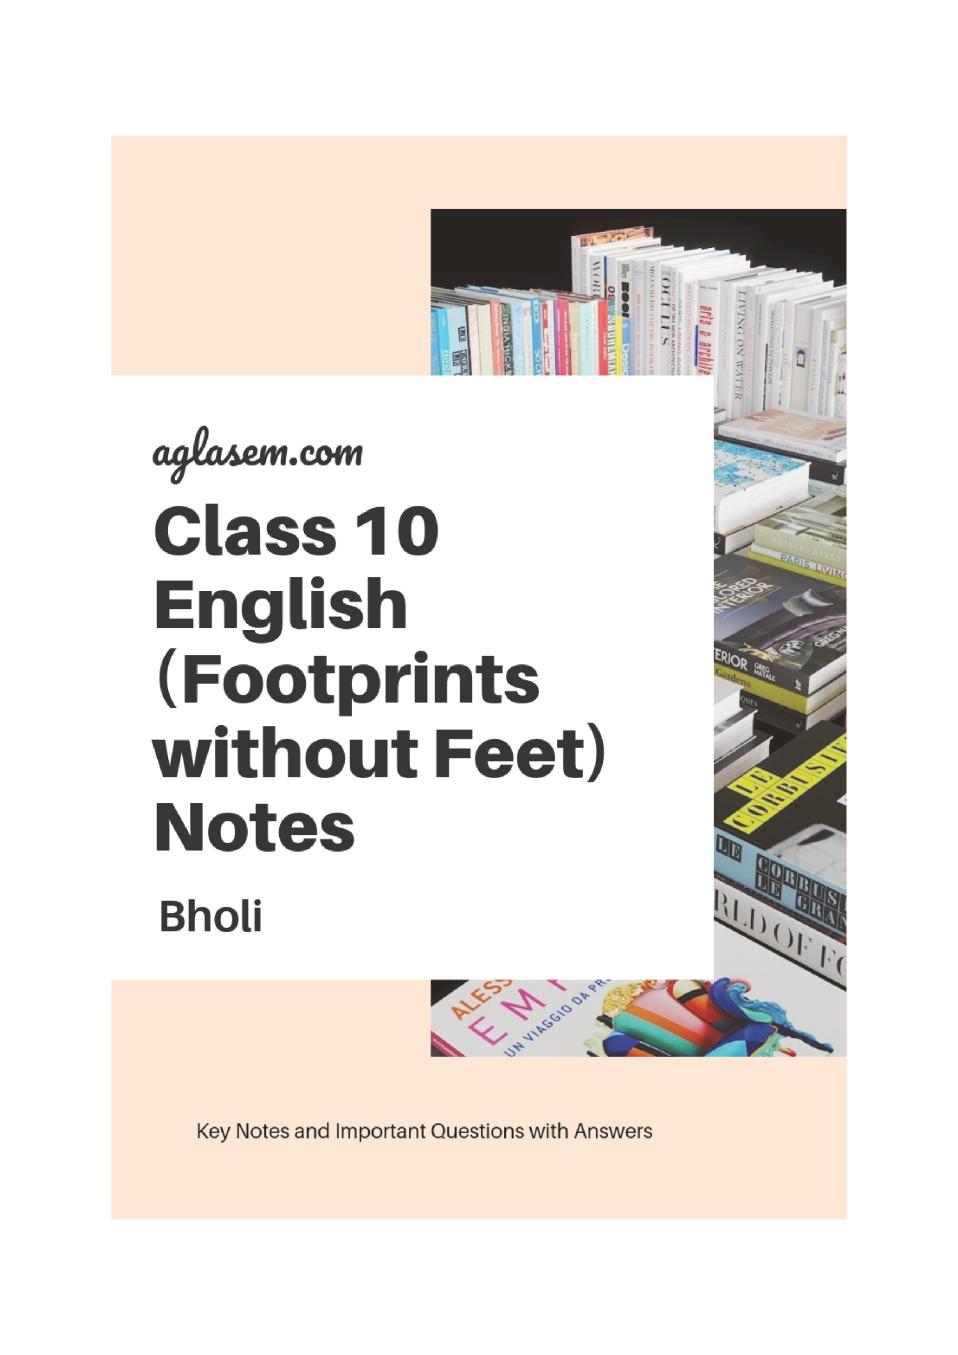 Class 10 English Footprints without Feet Notes For Bholi - Page 1